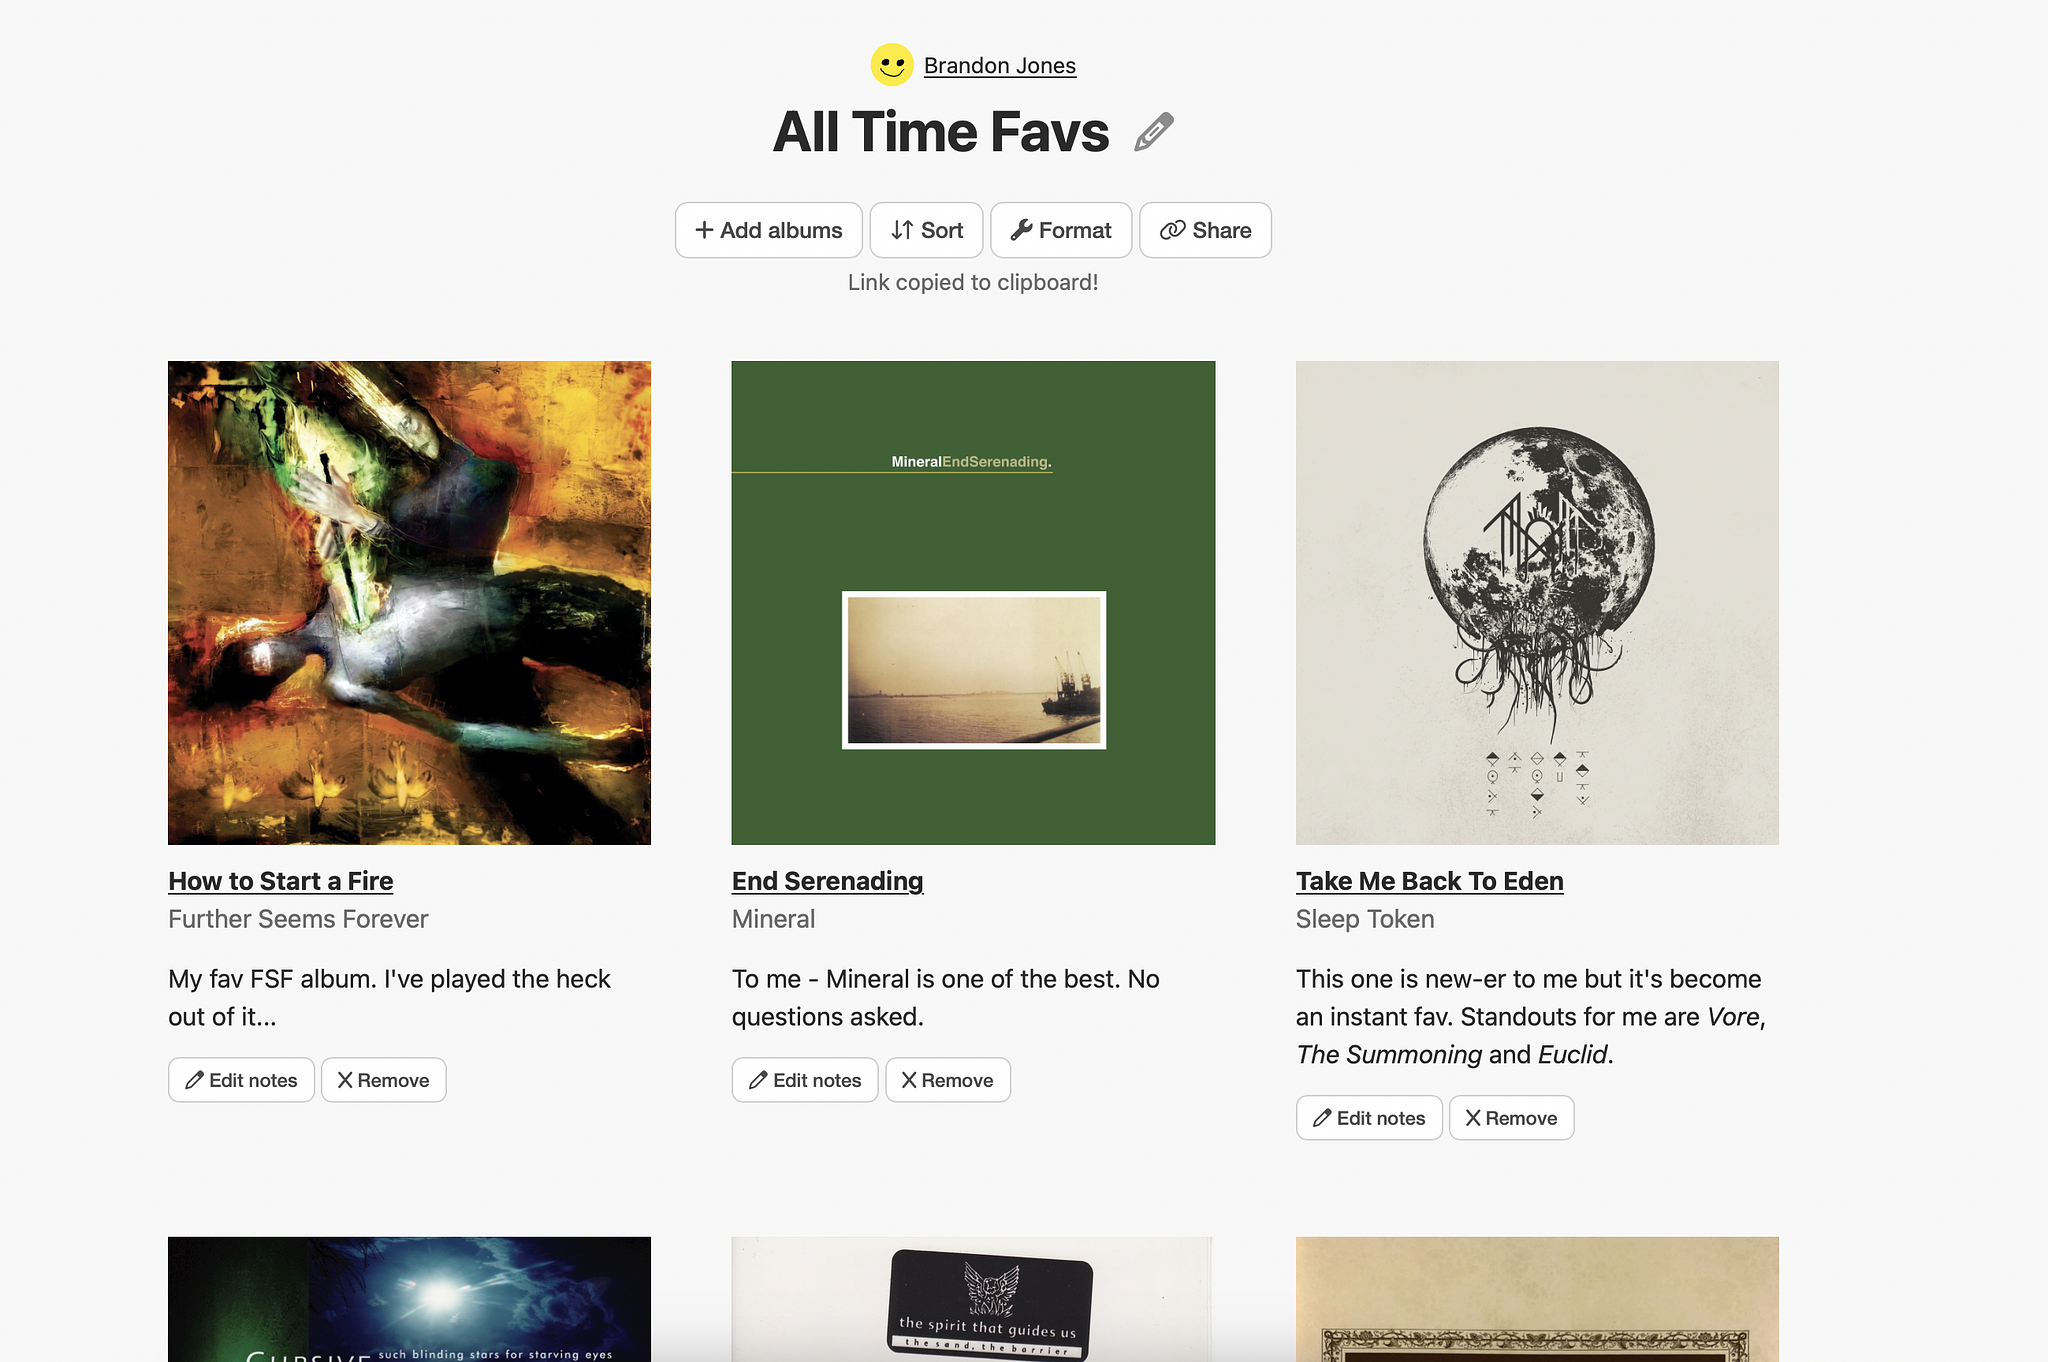 Screenshot of my All Time Fav list on Album Whale. It's 3 albums in a row with 3 underneath as well, partially in view.